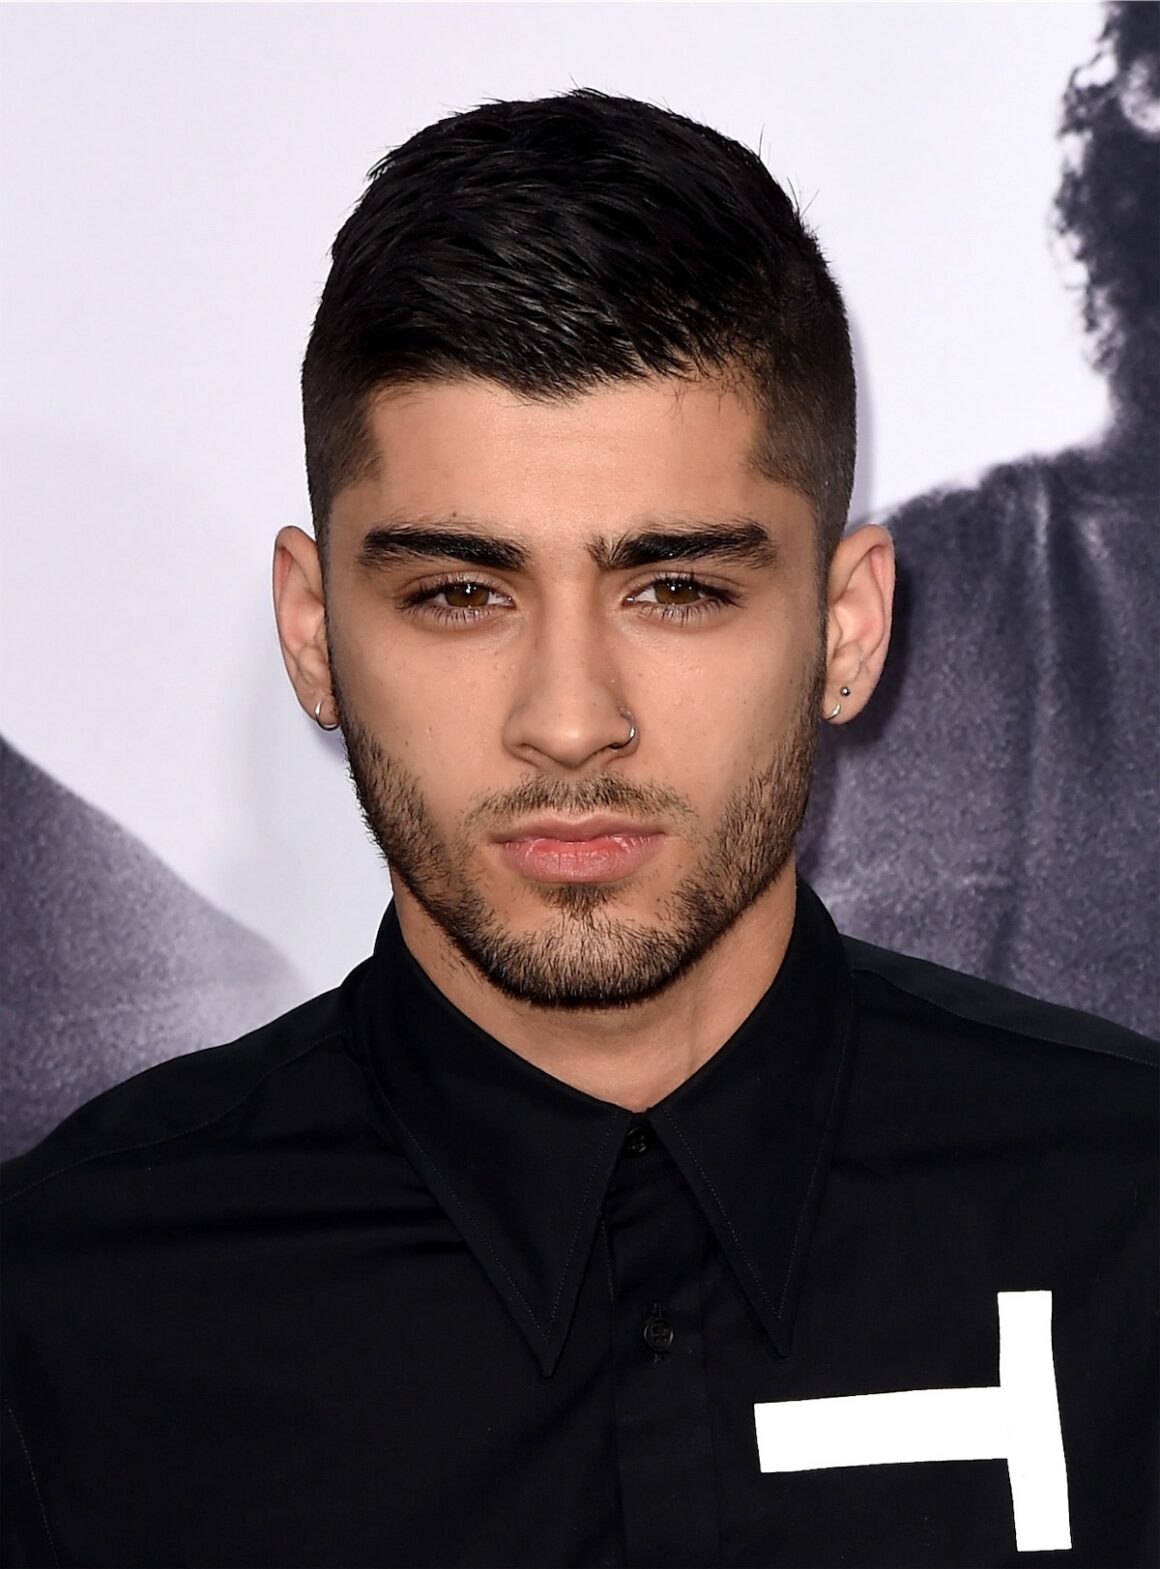 Zayn Malik Universal Pictures And Legendary Pictures' Premiere Of "Straight Outta Compton" - Arrivals